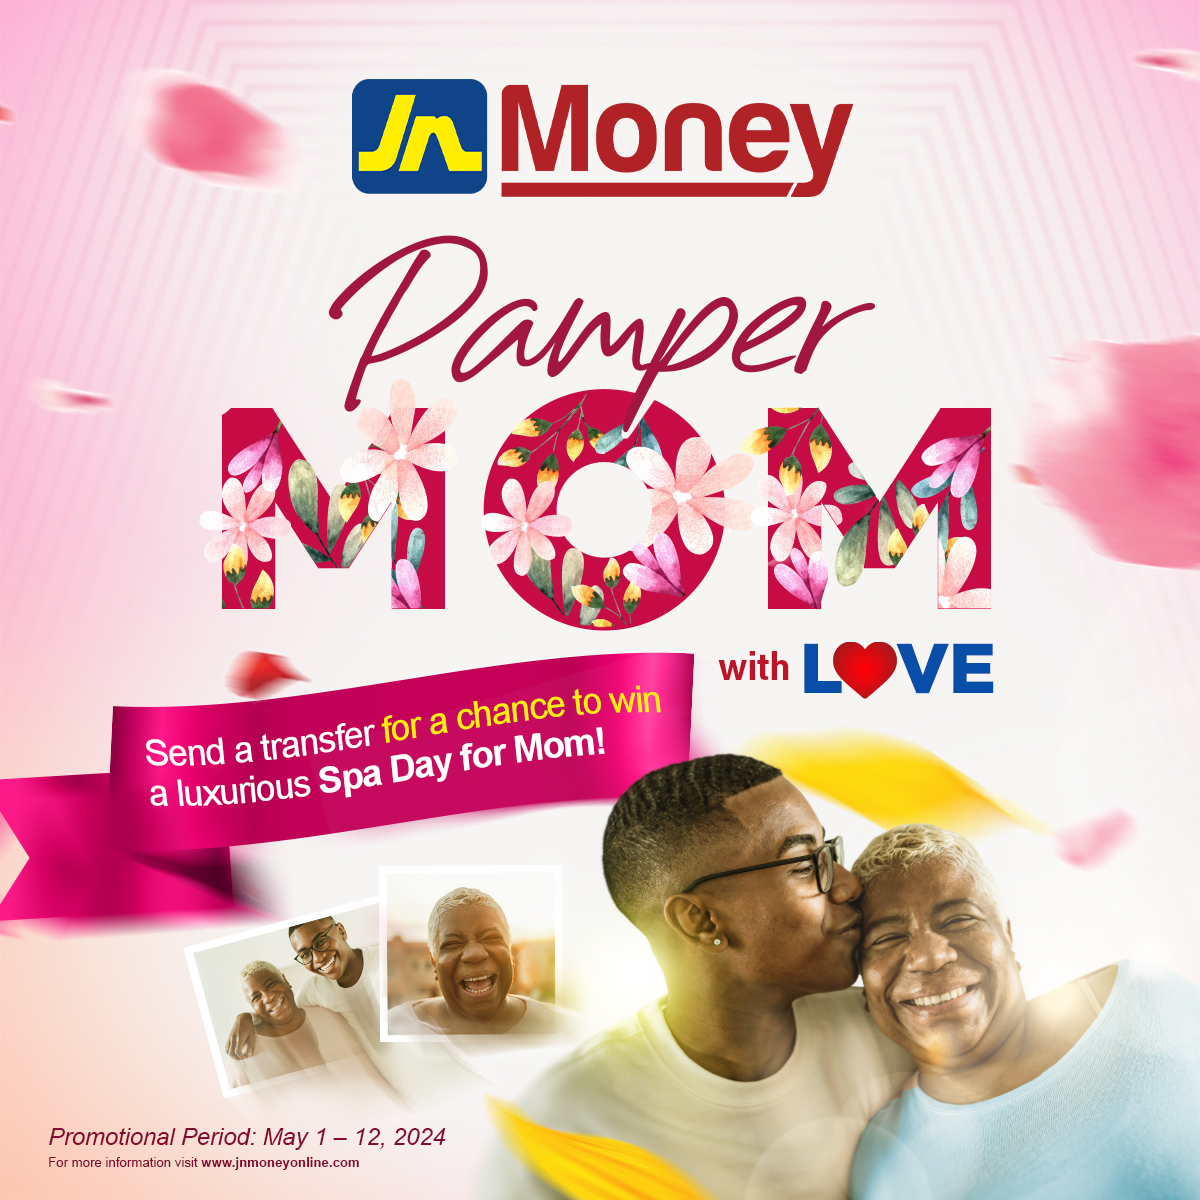 Pamper Your Mom with Love for Mother’s Day!💐 Treat her to a luxurious Spa Day on us. Simply send a JN Money transfer between May 1 - 12, 2024, and get automatically entered to win! Open to our customers in the USA, Canada & the Caribbean. #PamperMomWithLove #JNMoney #MothersDay